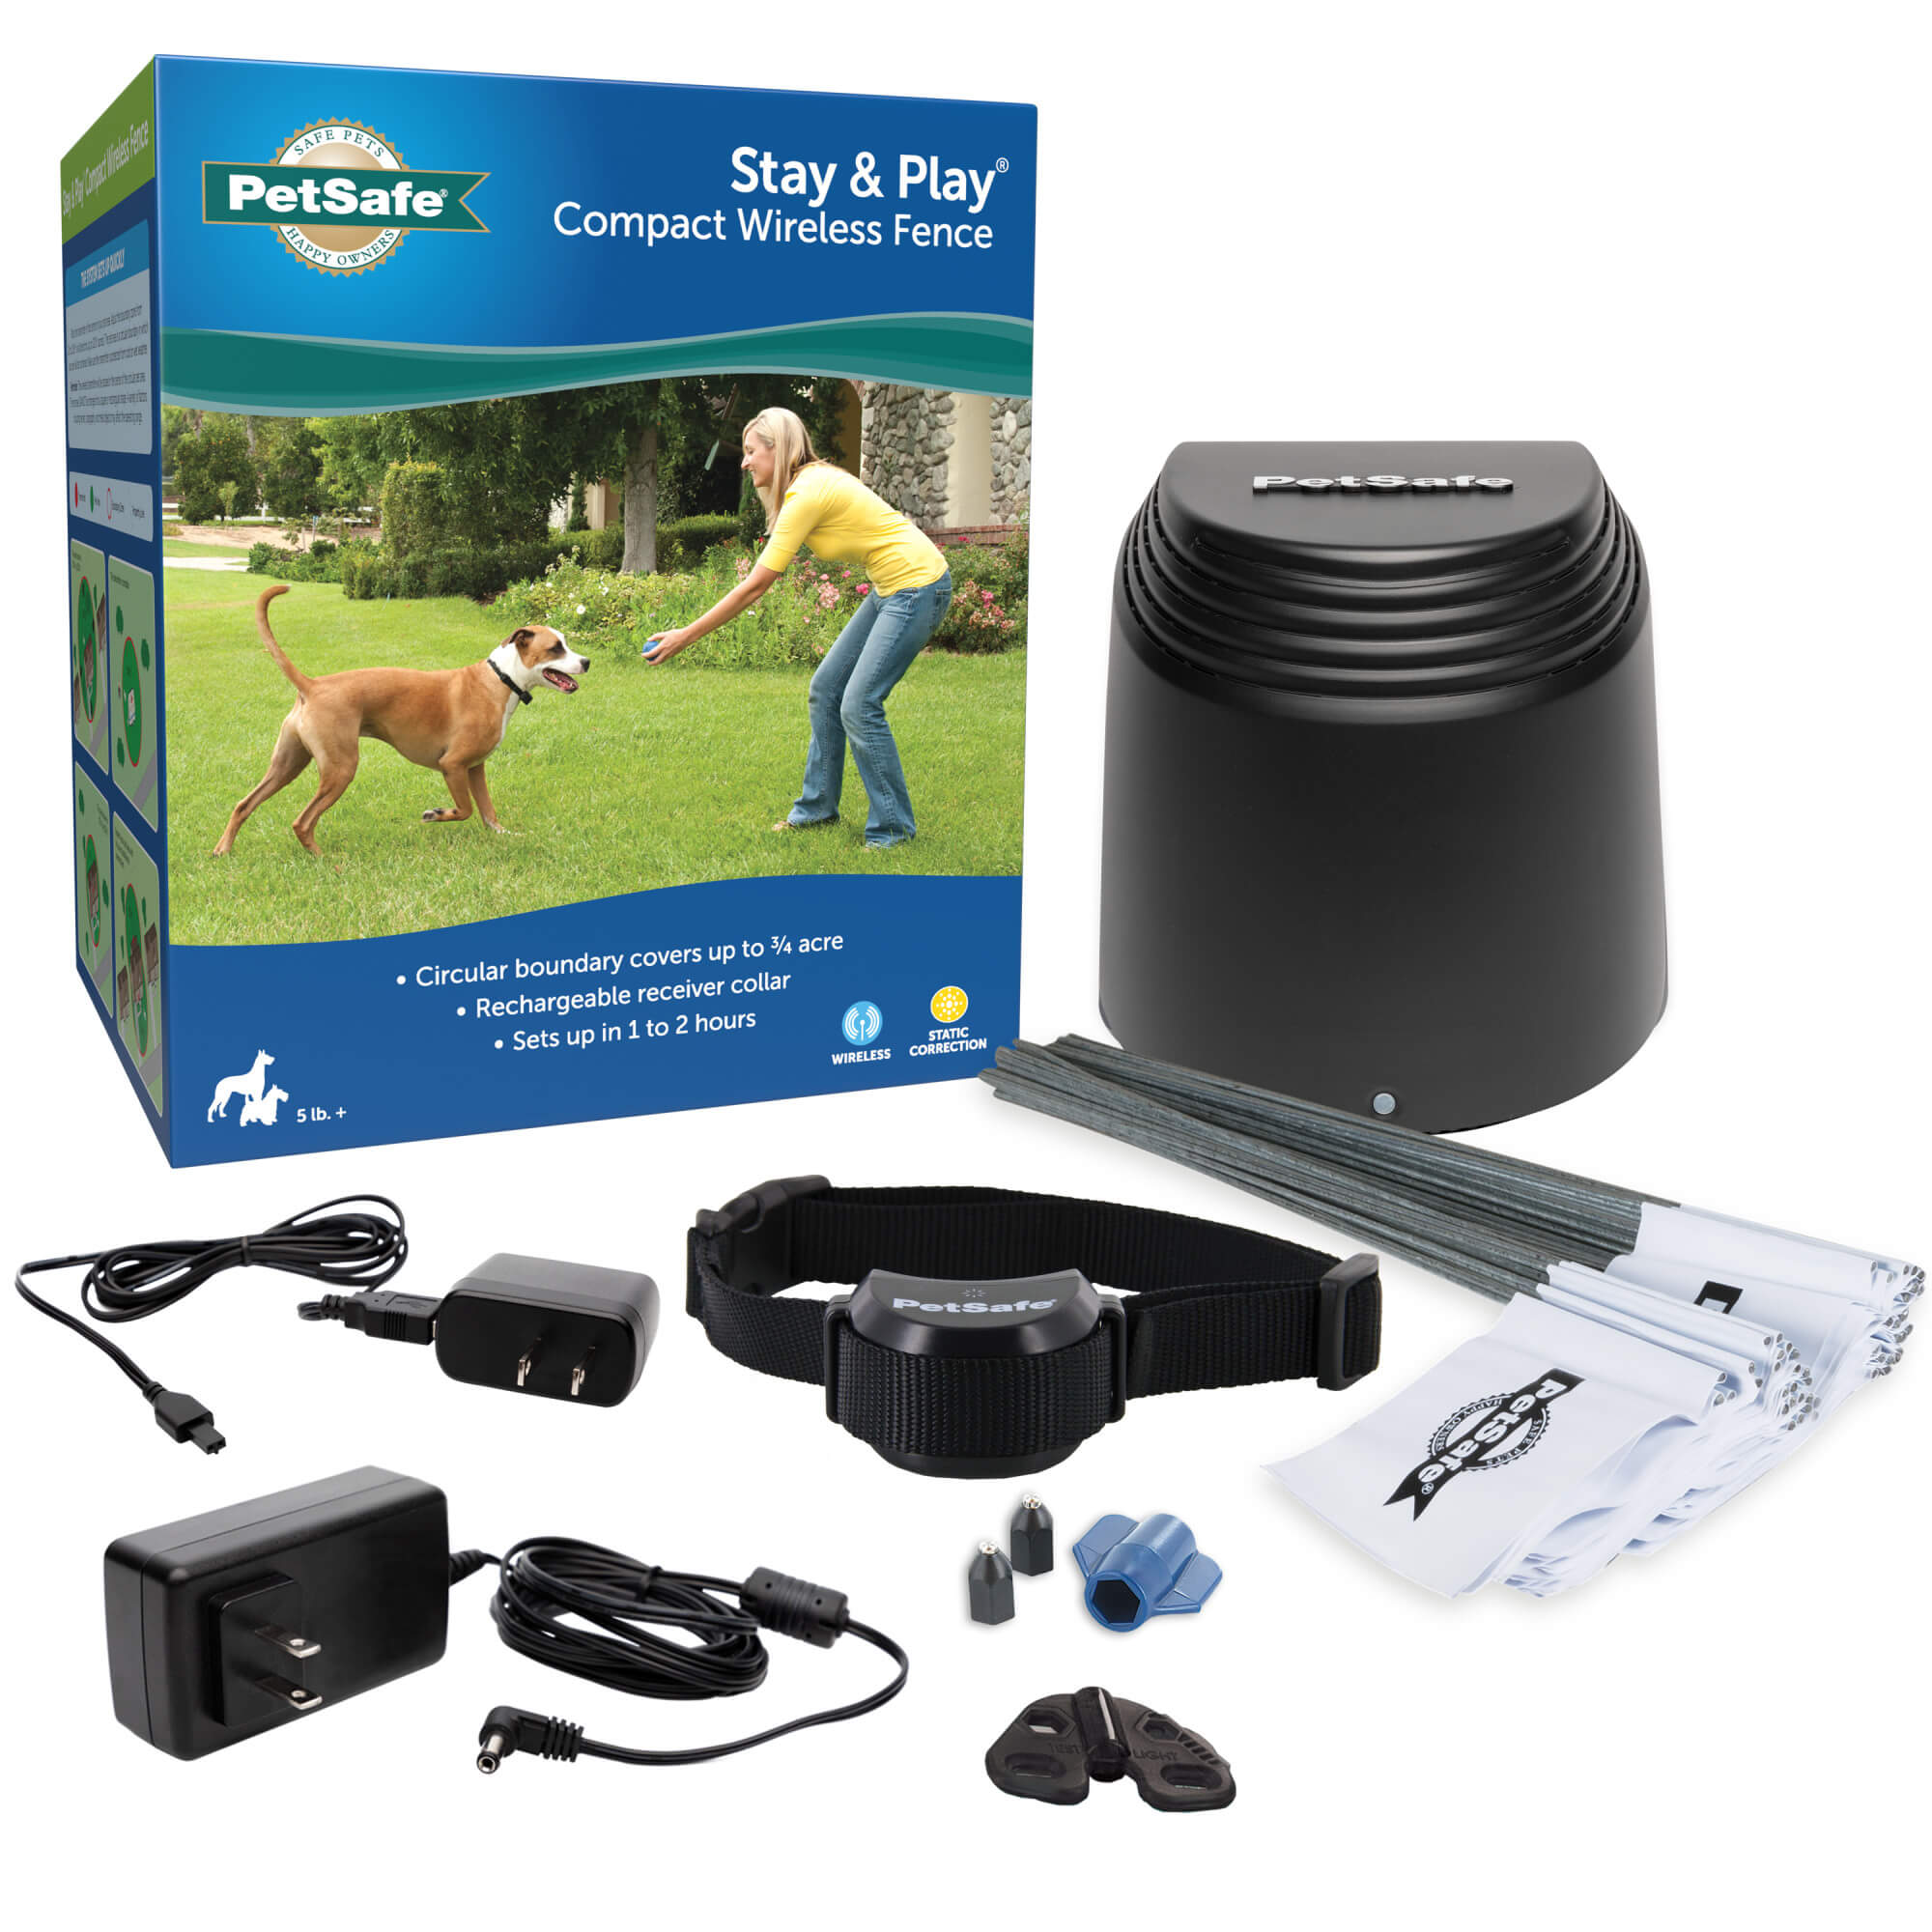 Petsafe stay and play wireless fence 